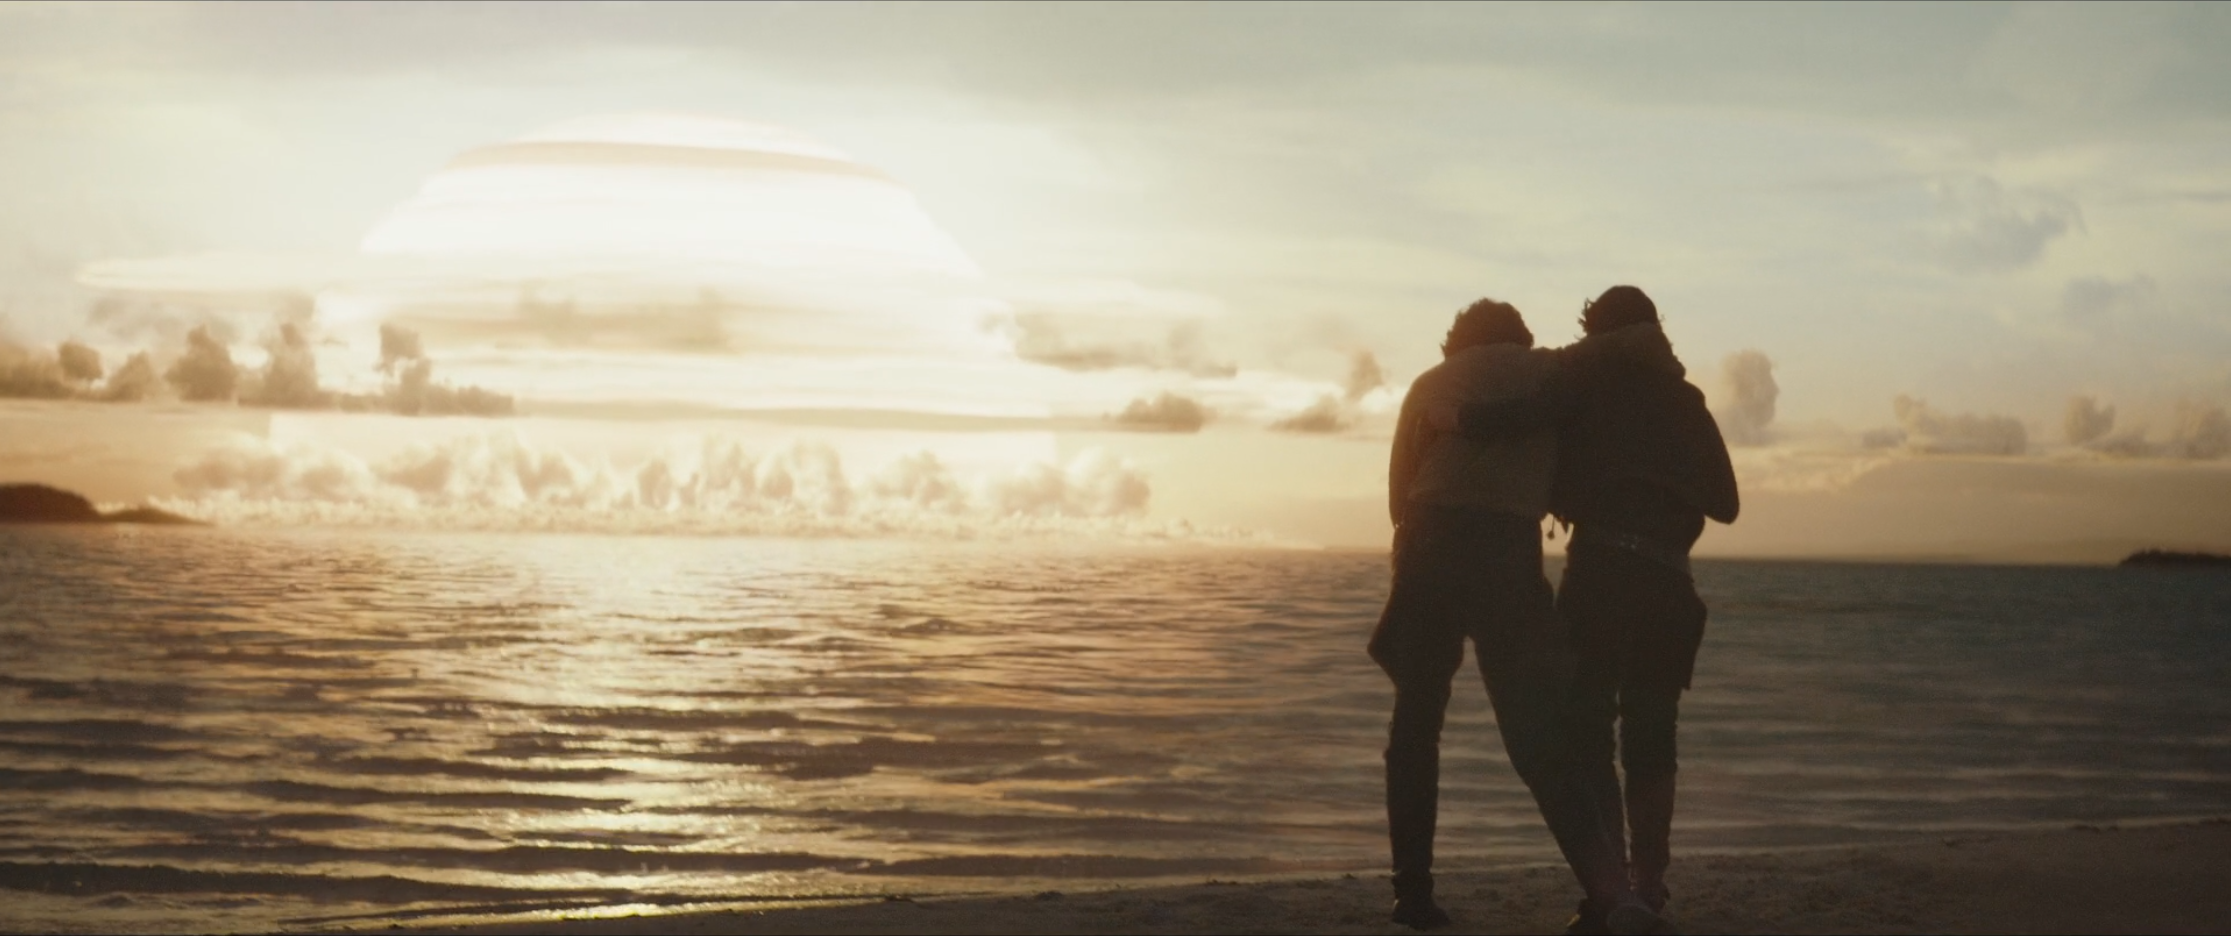 Two silhouetted individuals embracing by the sea at sunset